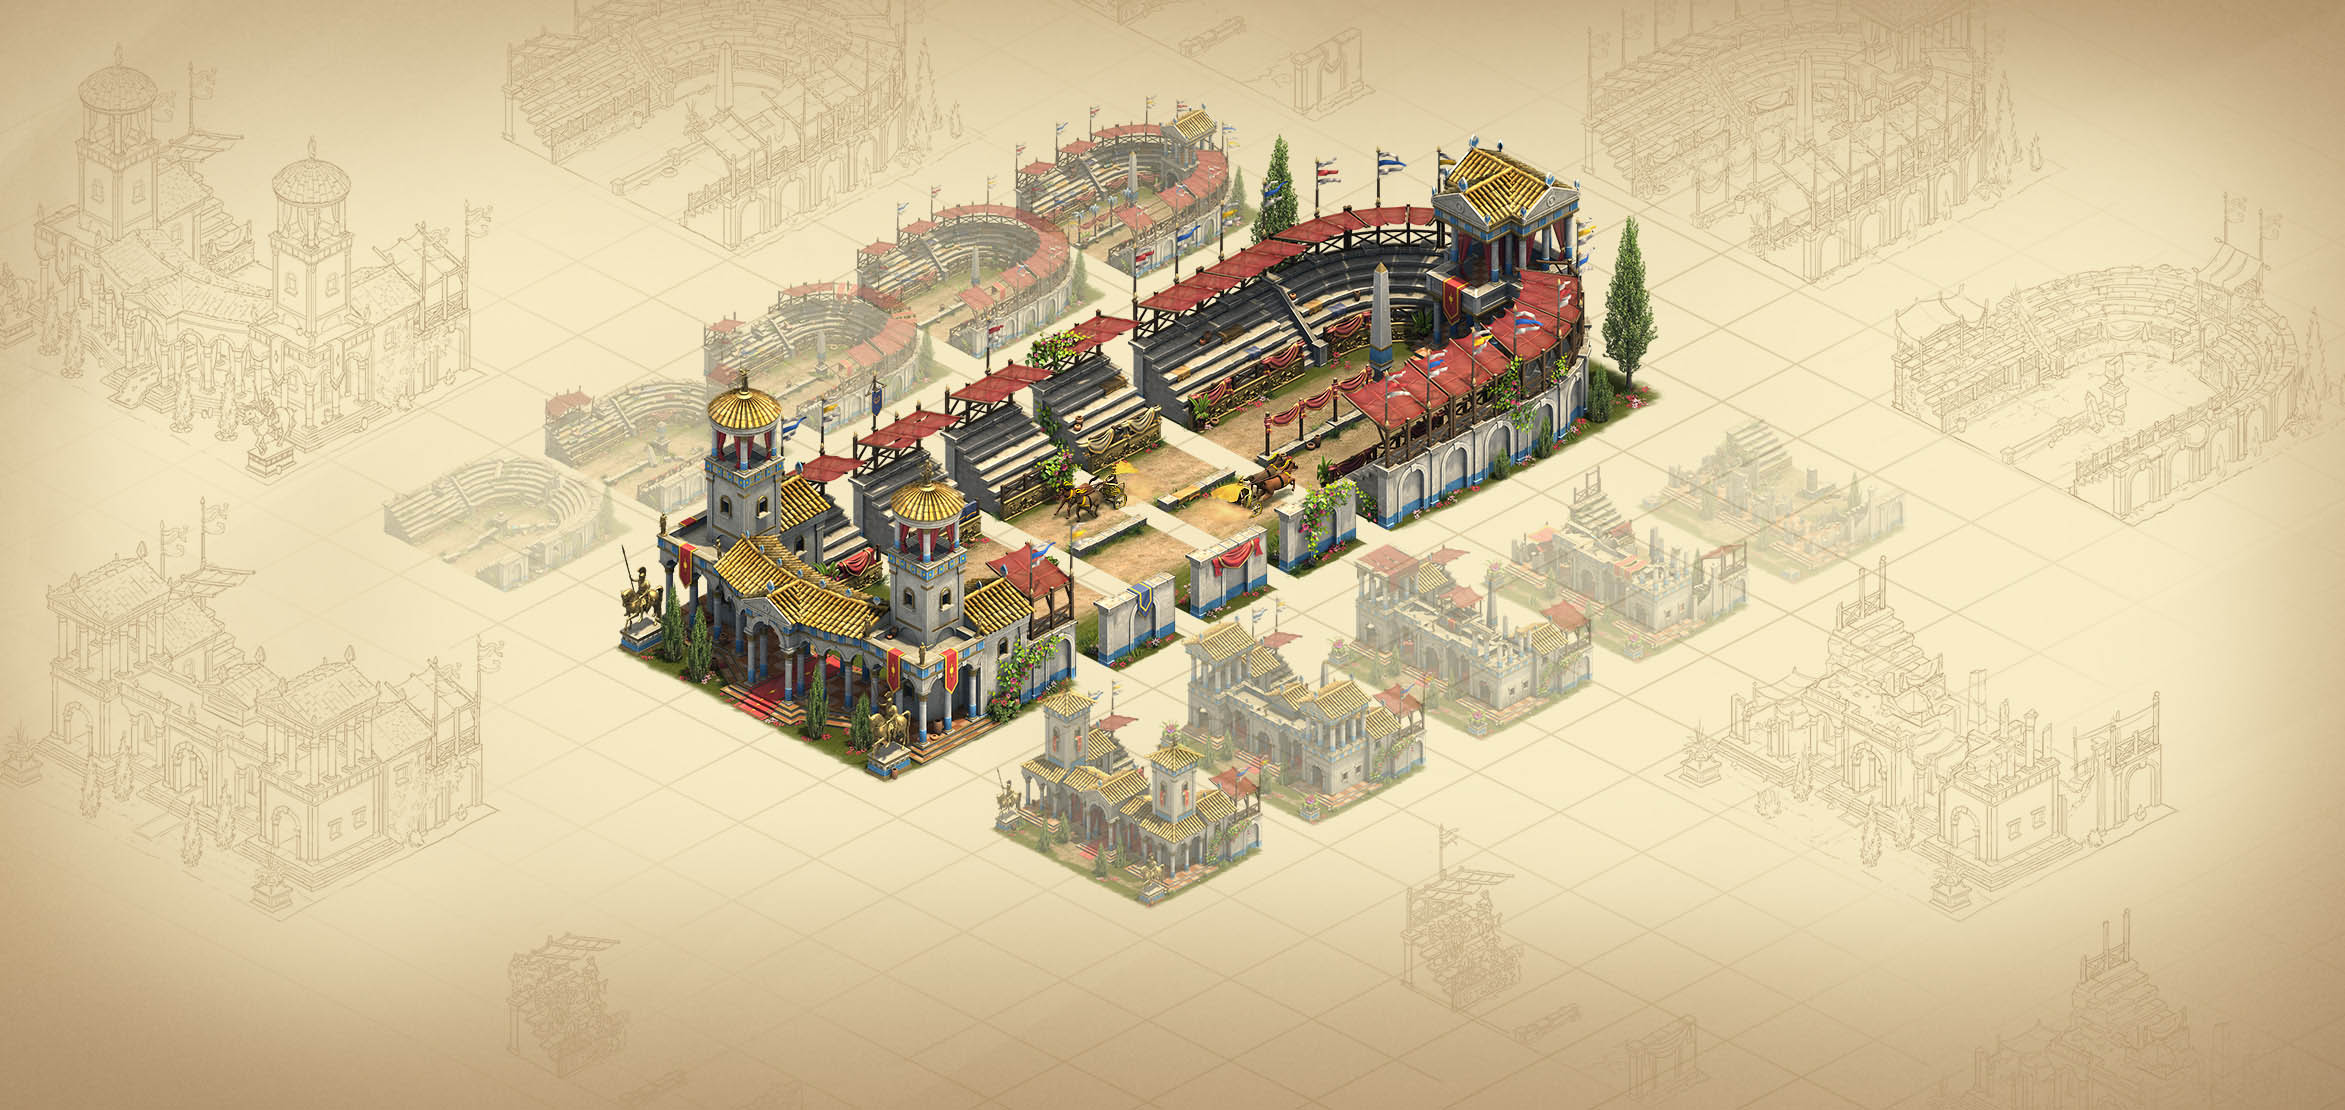 forge of empires soccer event wiki